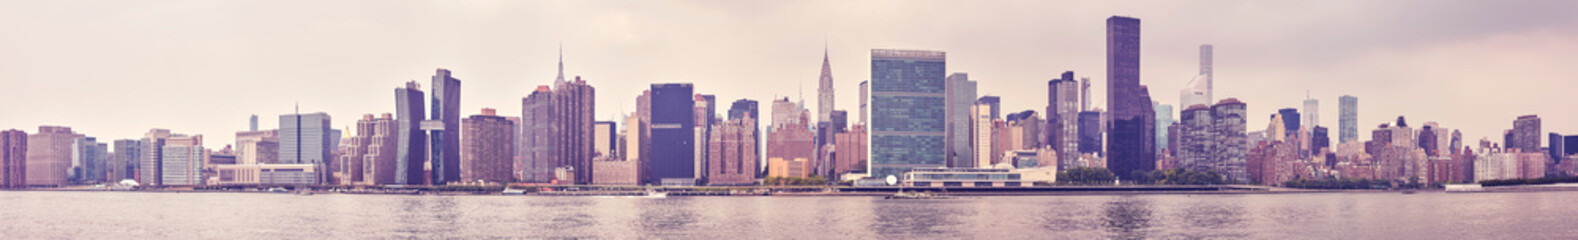 Manhattan panoramic view, color toning applied, New York City, USA.